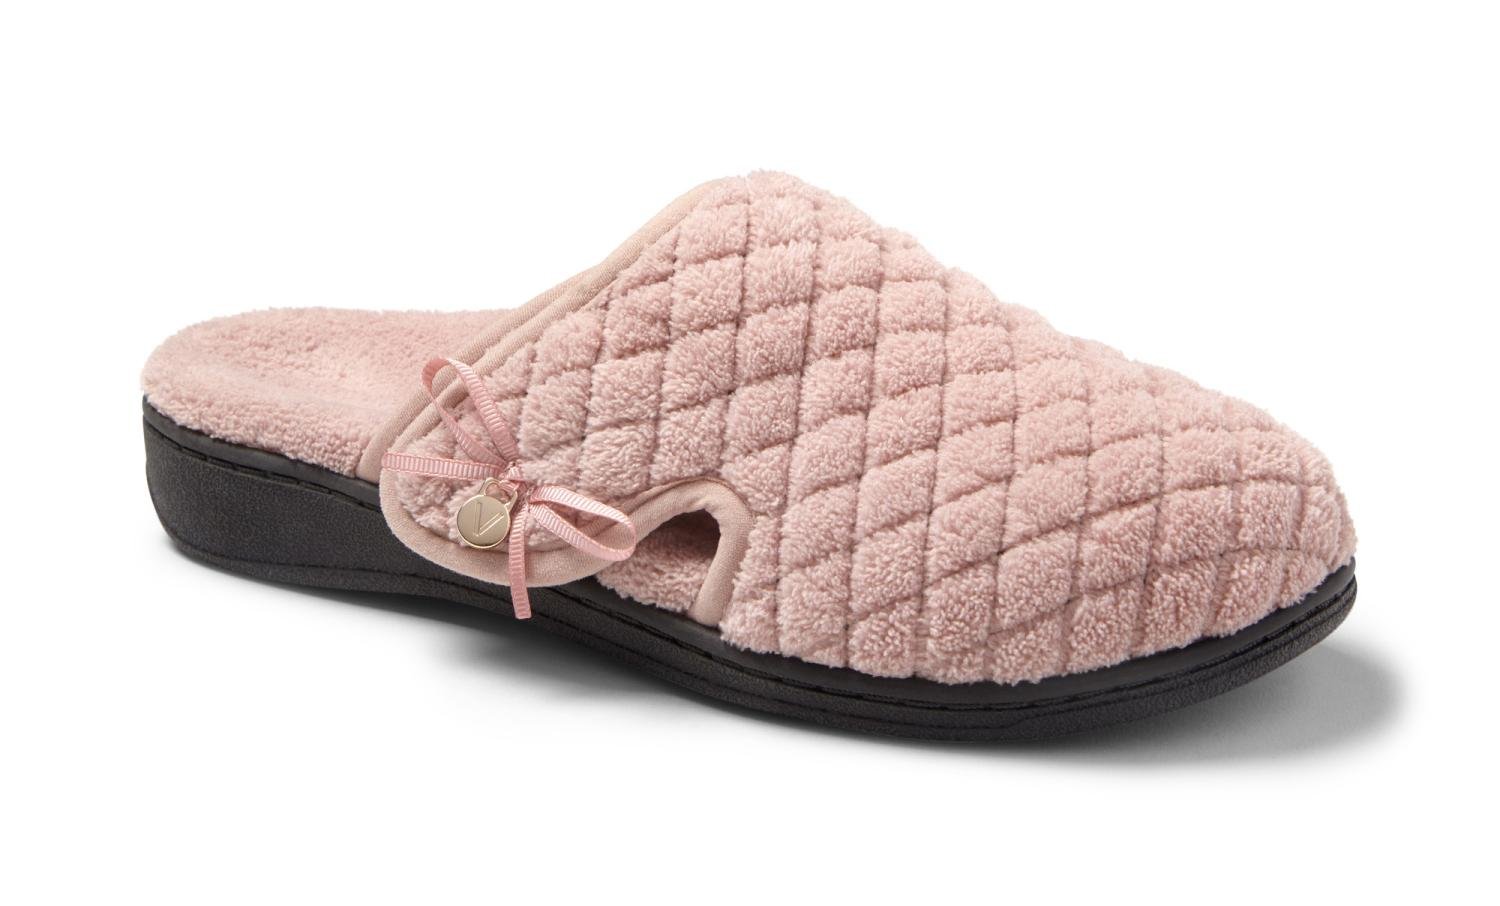 vionic pleasant women's orthotic support slippers